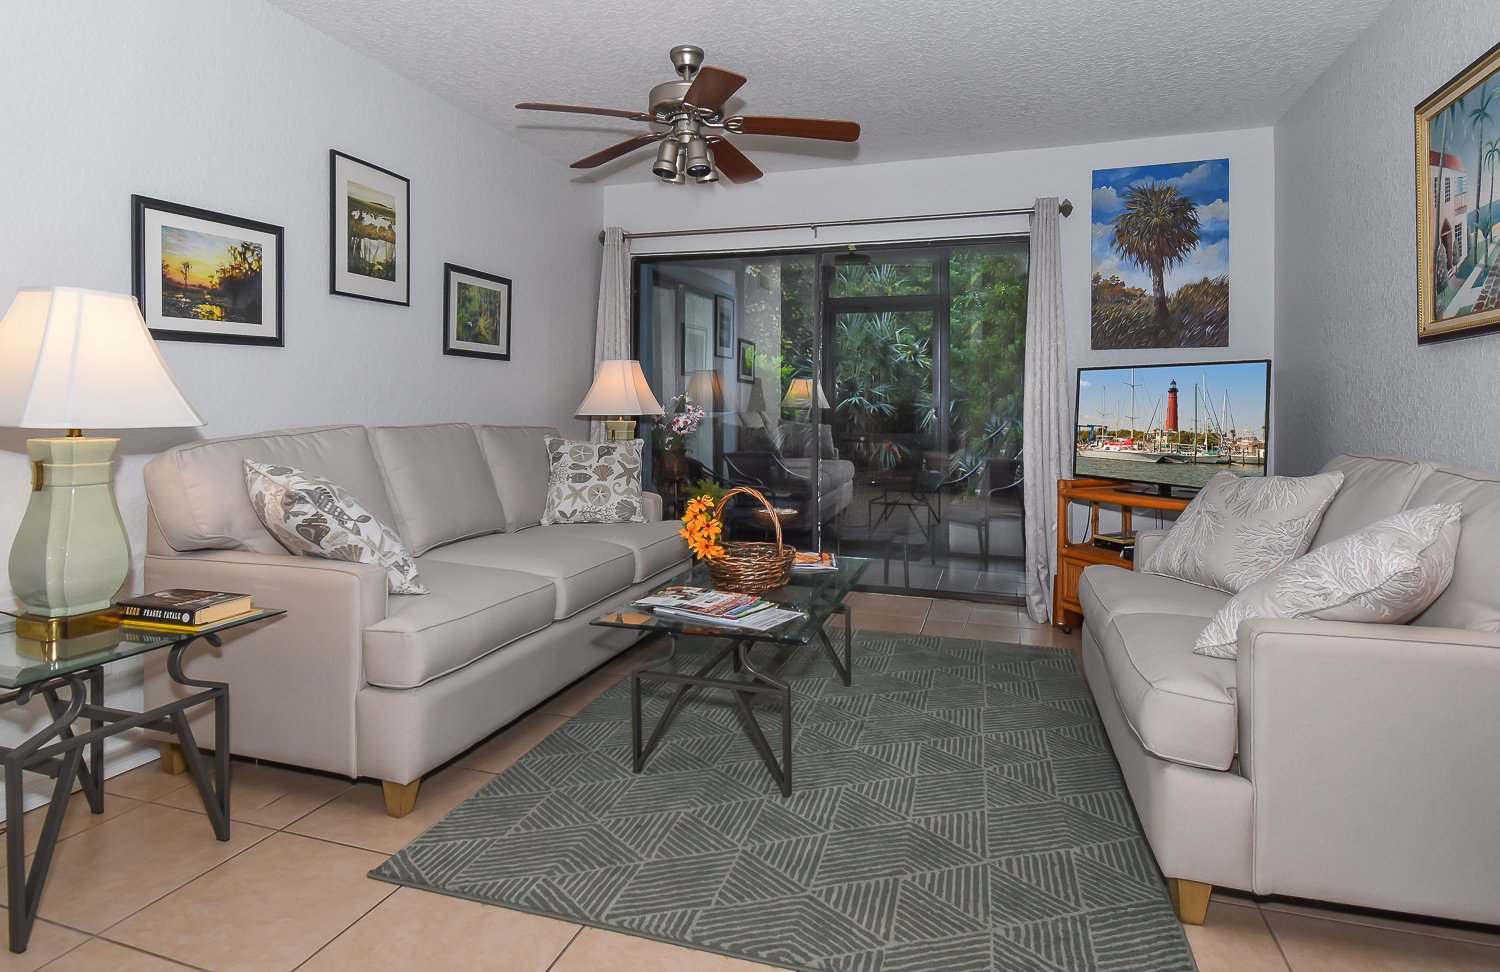 Living room with couches in this new Smyrna Beach vacation rental.